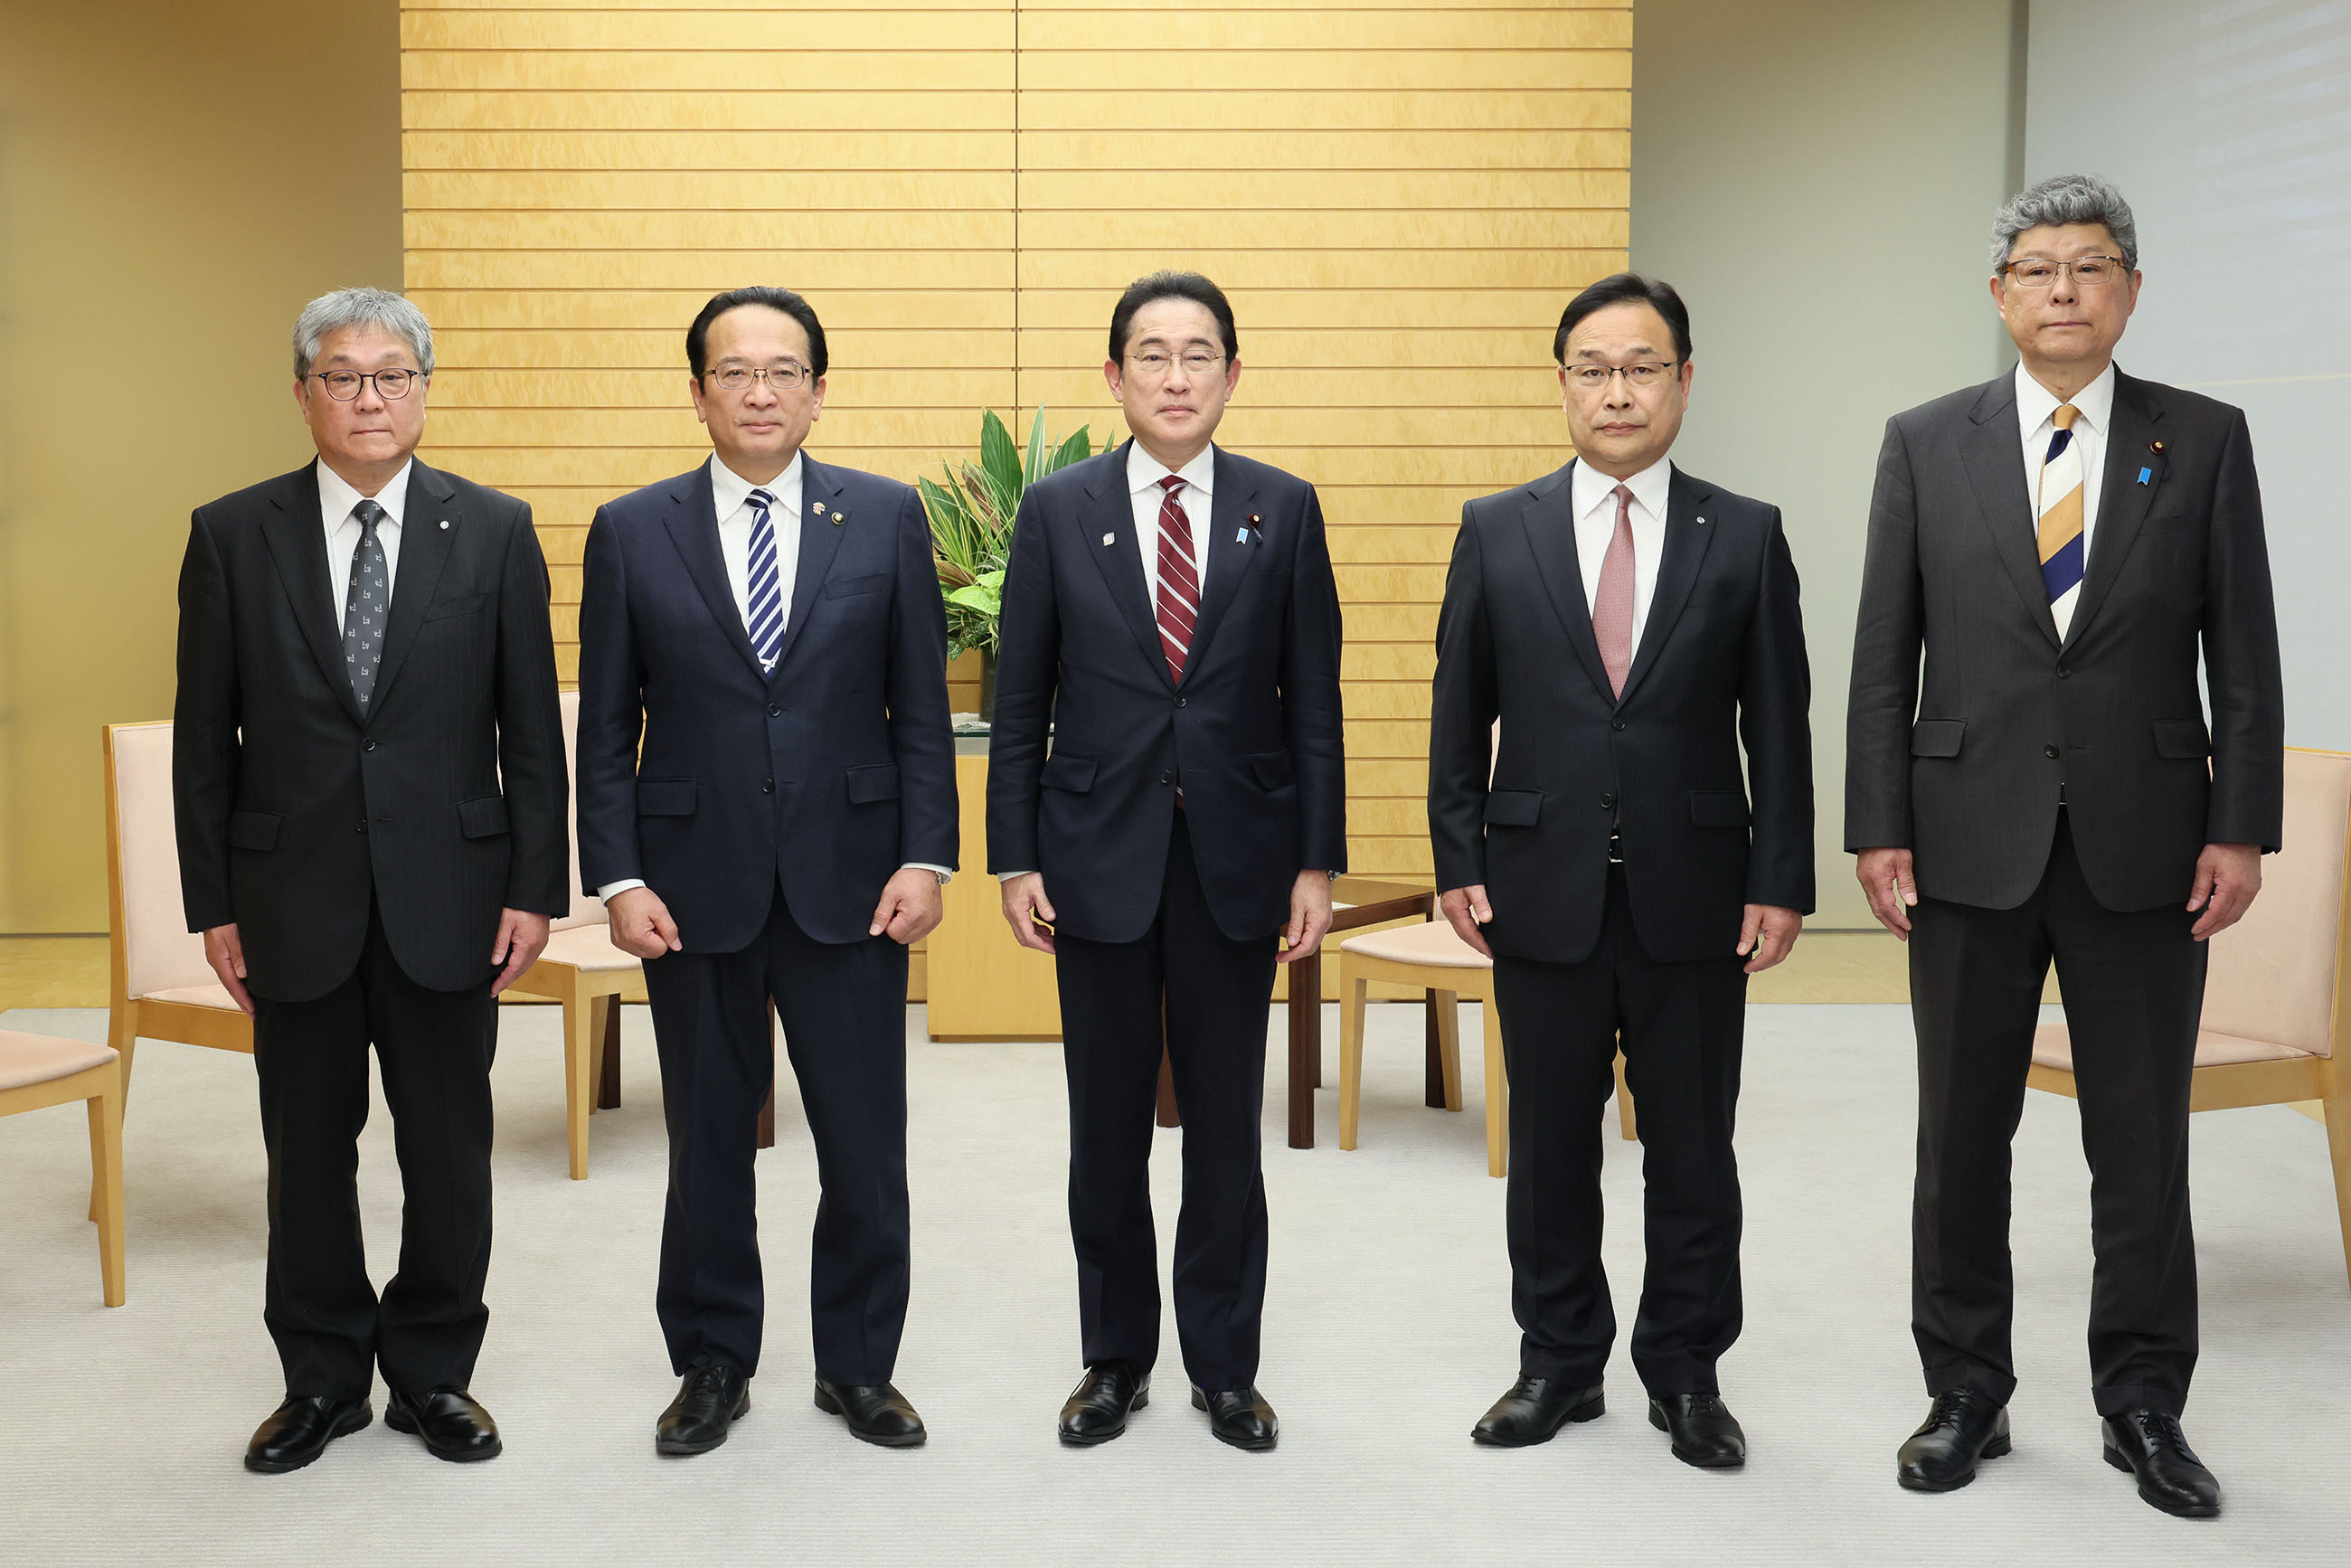 Courtesy Call from the Head of Zengenkyo National Council of Municipalities with Nuclear Power Plants and Other Members